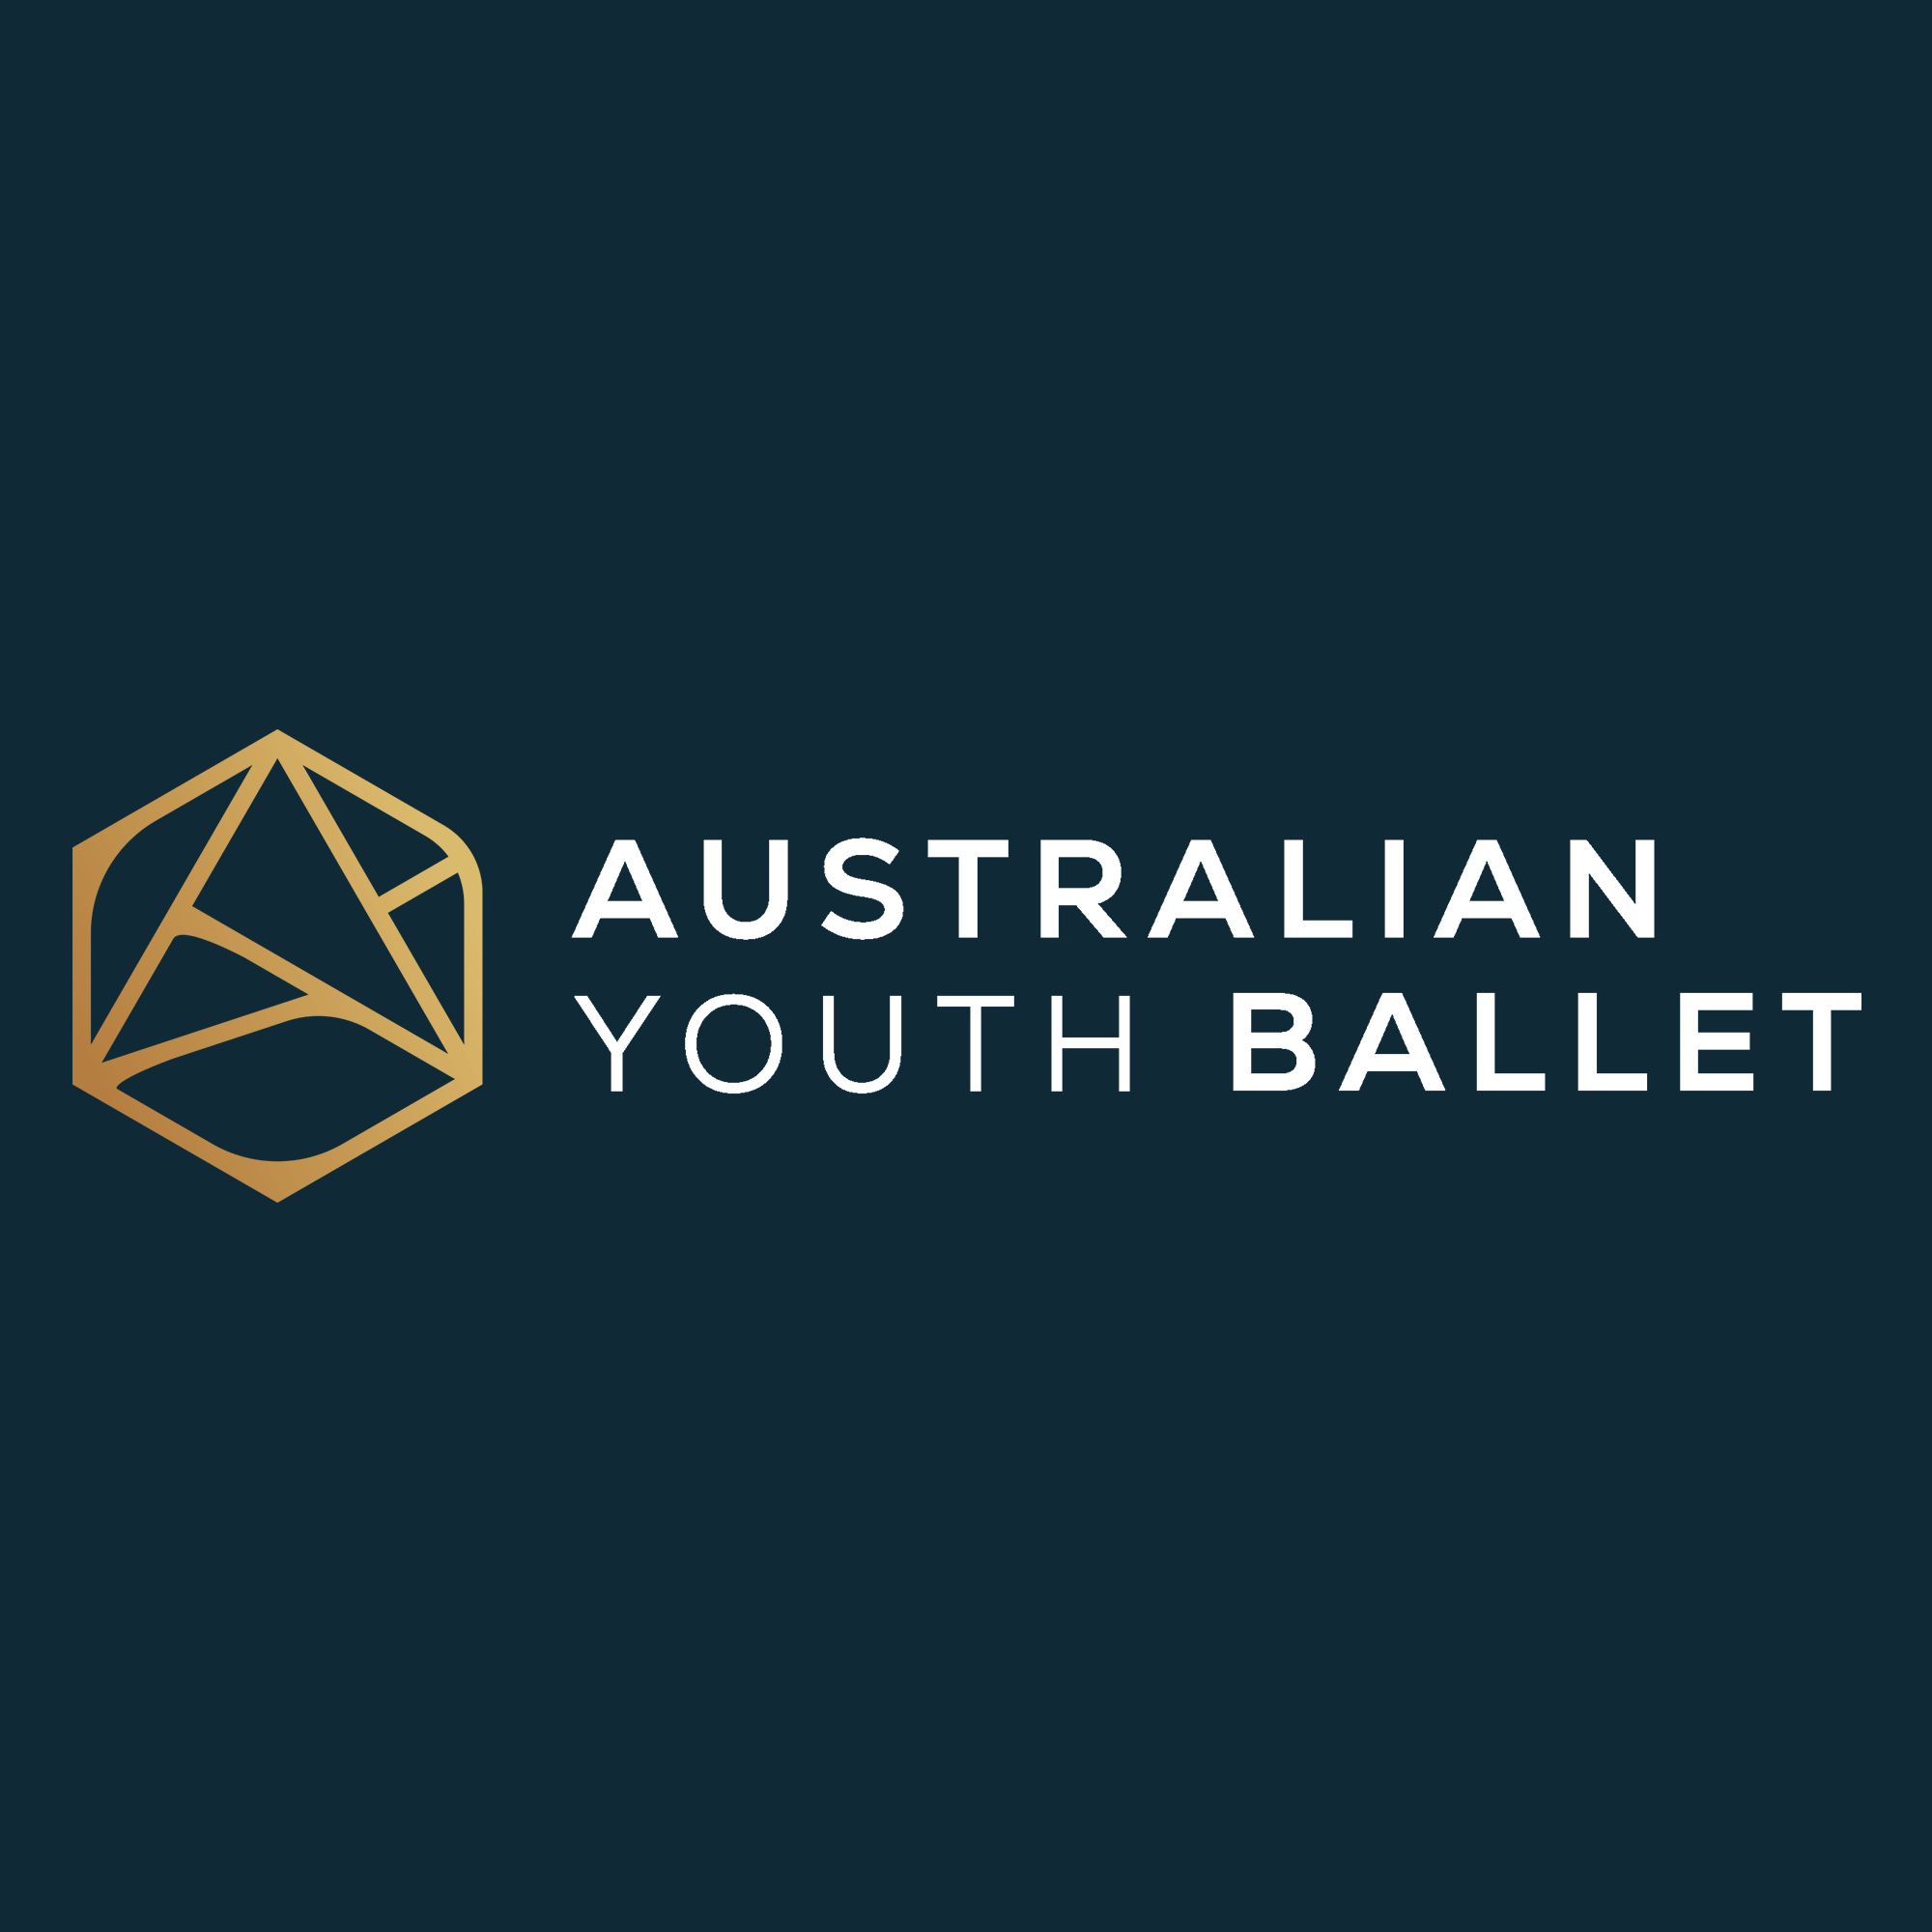 Launching our new youth ballet company – Australian Youth Ballet!